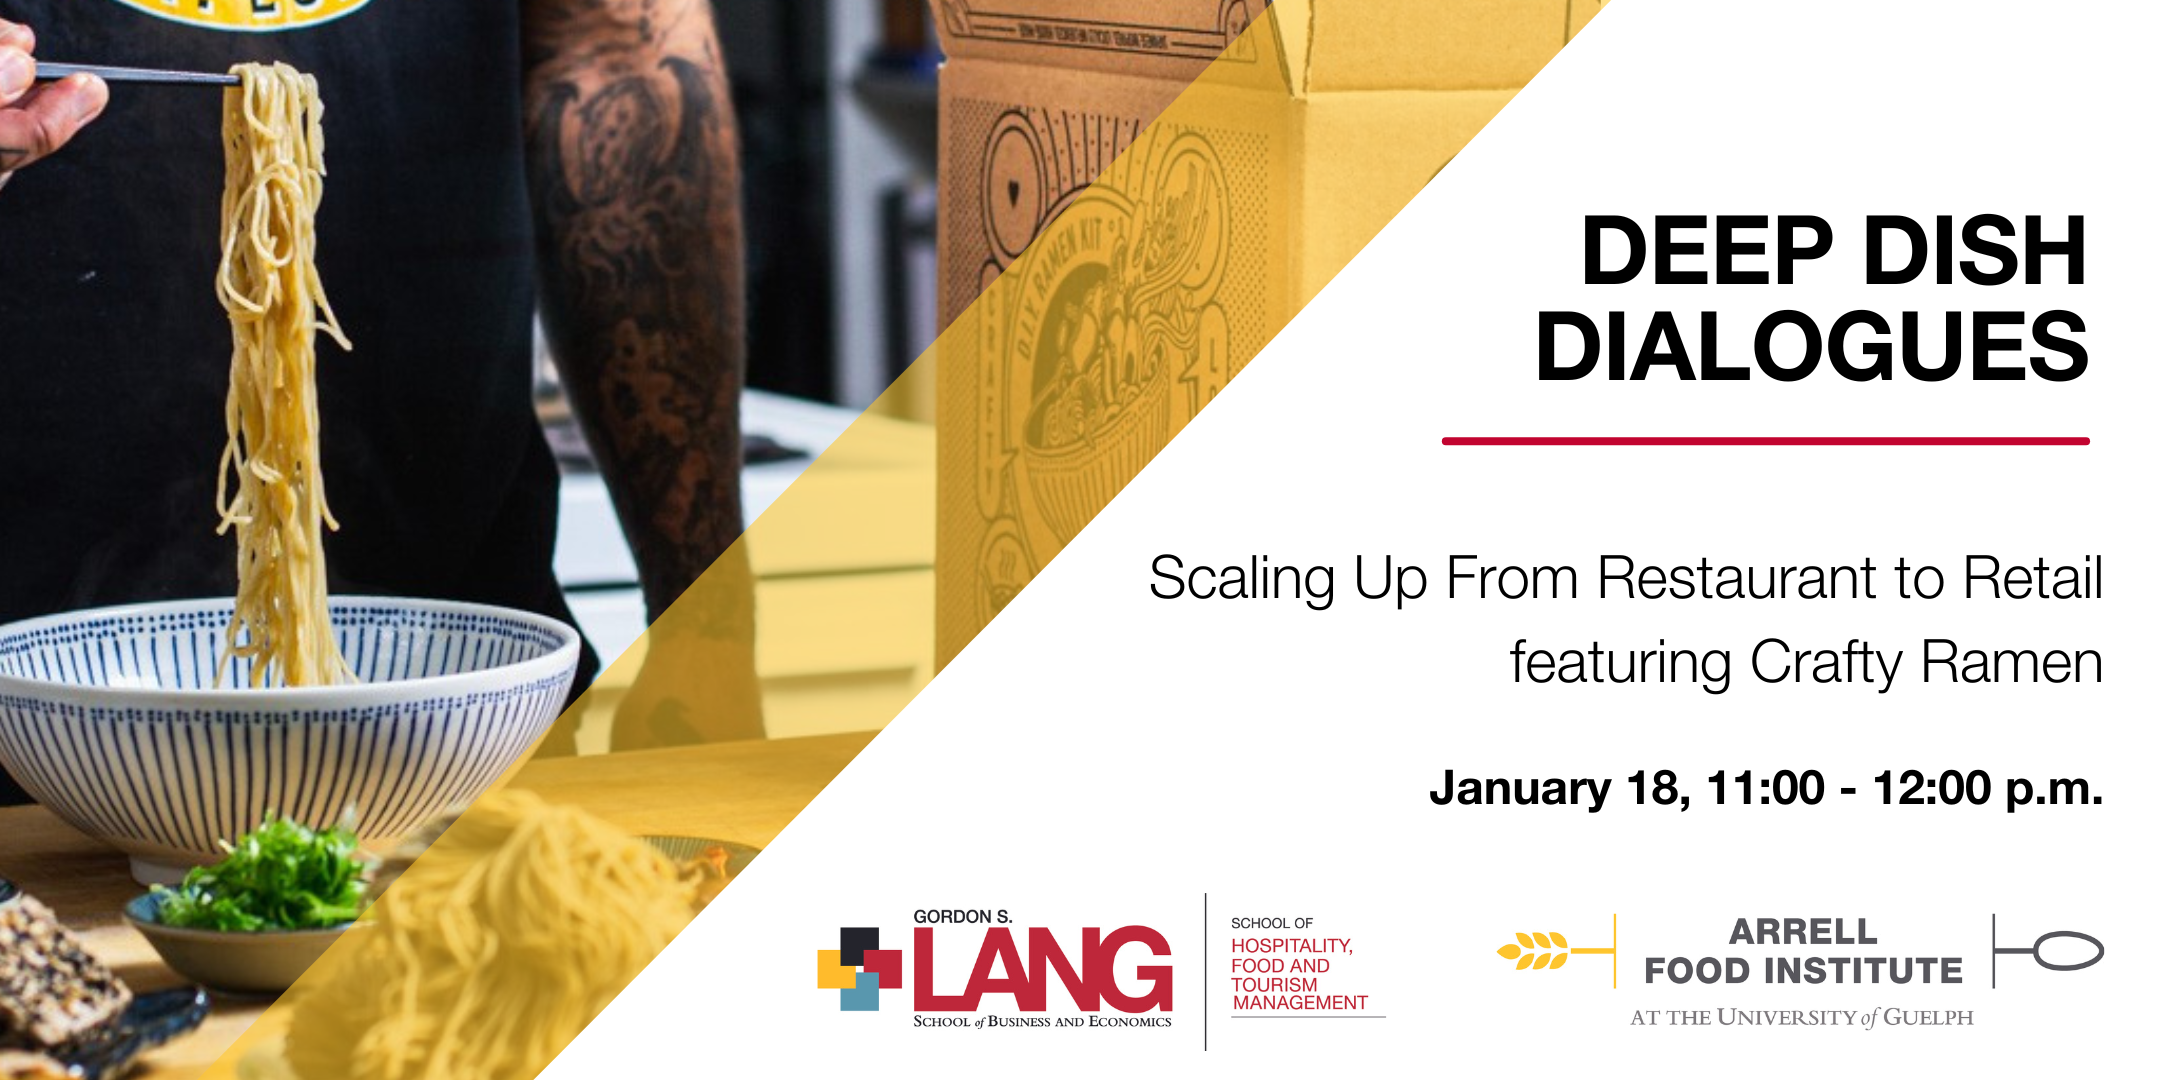 Deep Dish Dialogues. Scaling up from Restaurant to Retail featuring Crafty Ramen. January 18, 11 to 12 p.m. A person eating Ramen noodles.